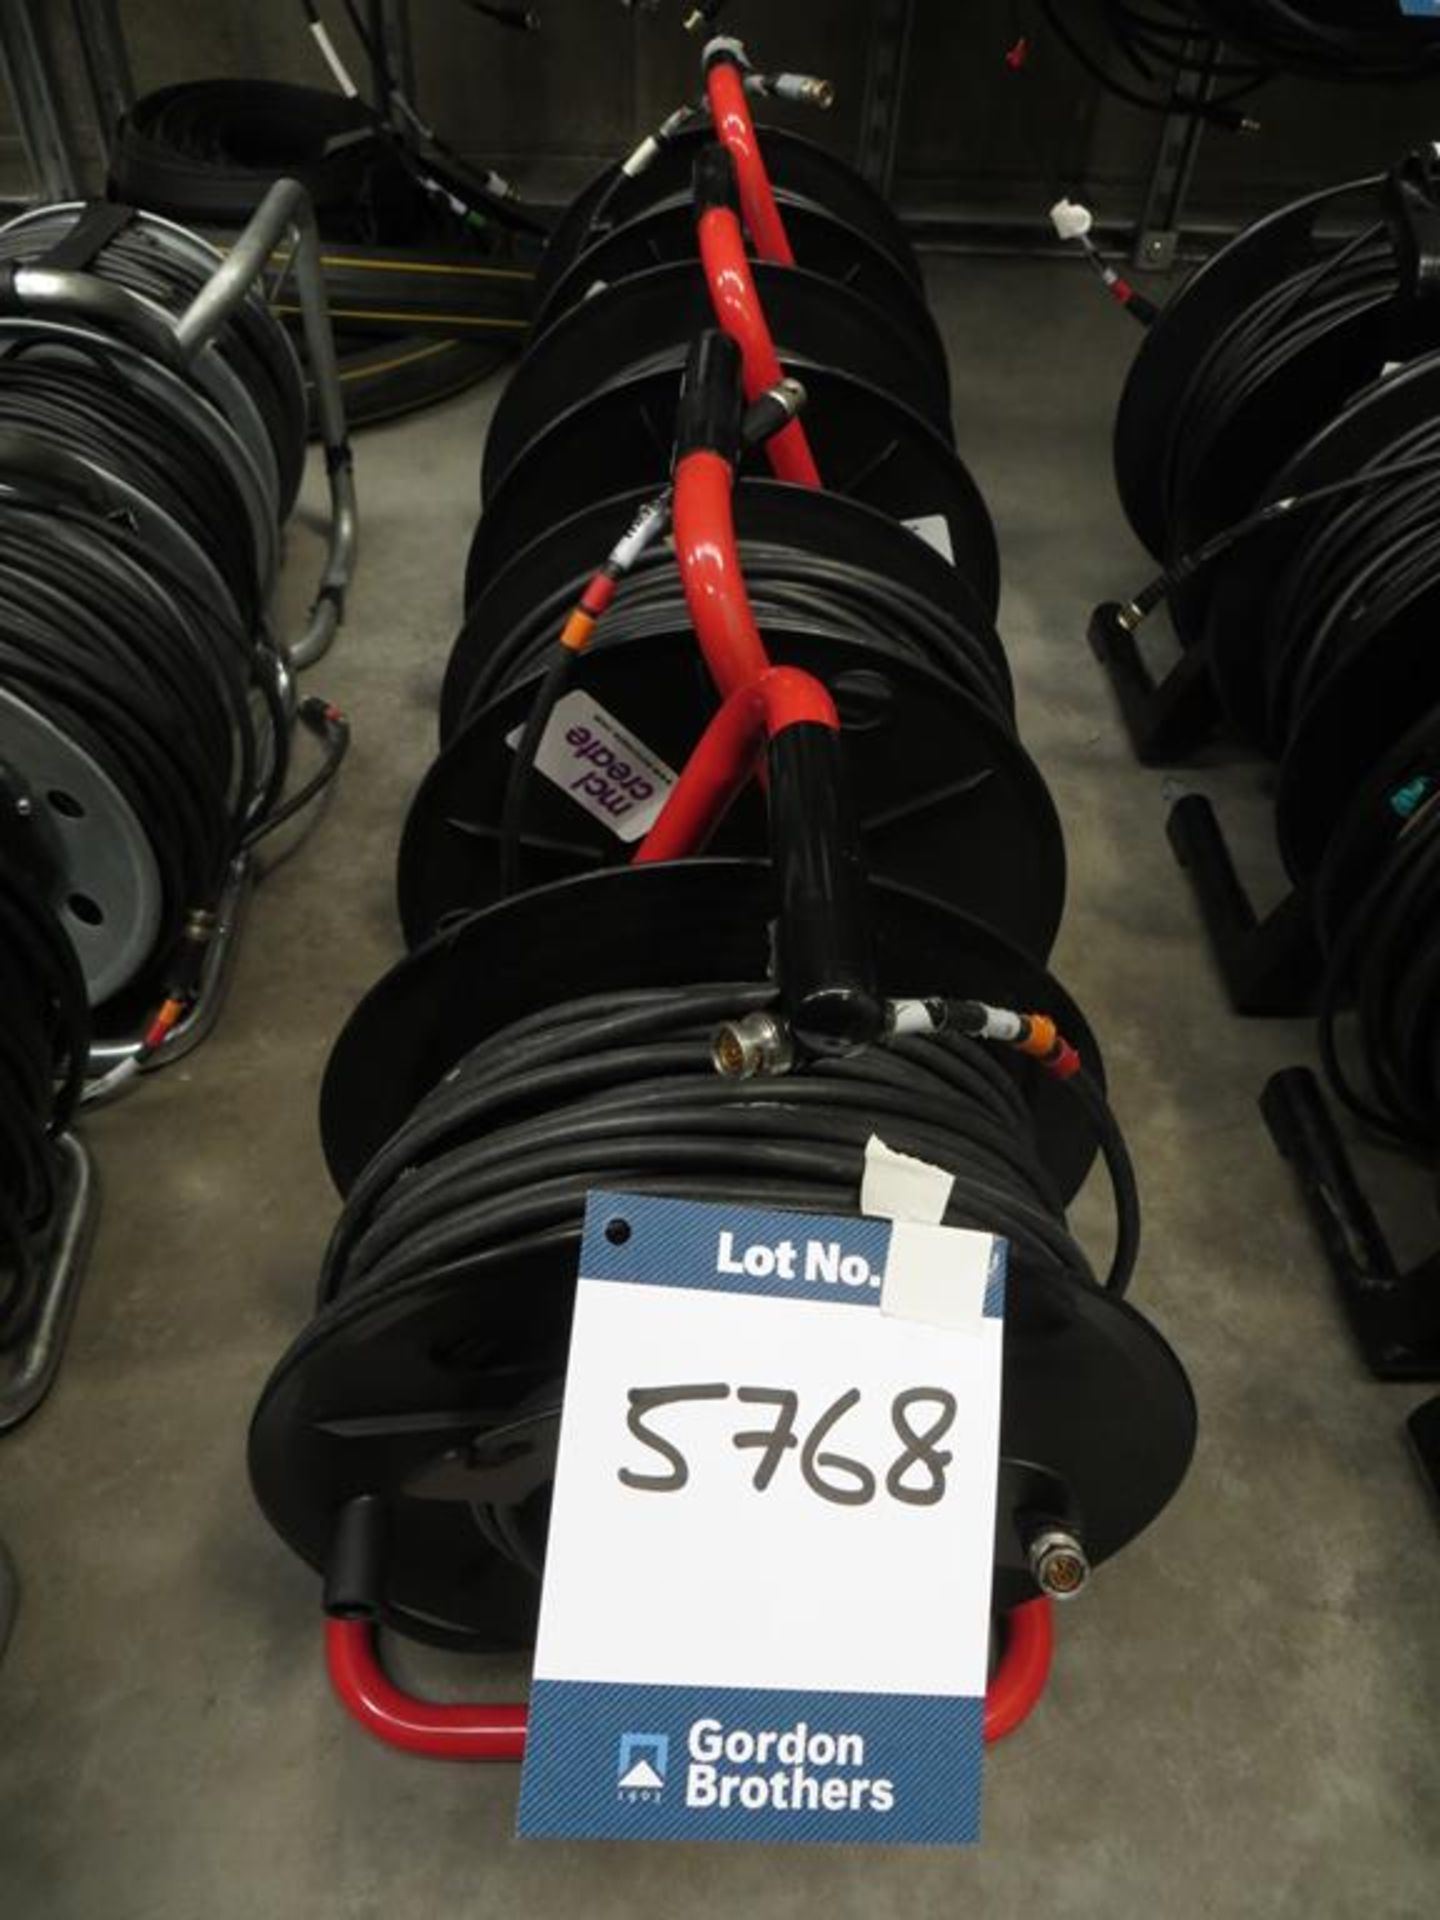 4x No. HD-Sid cable reels, 30m: MCL Create Limited